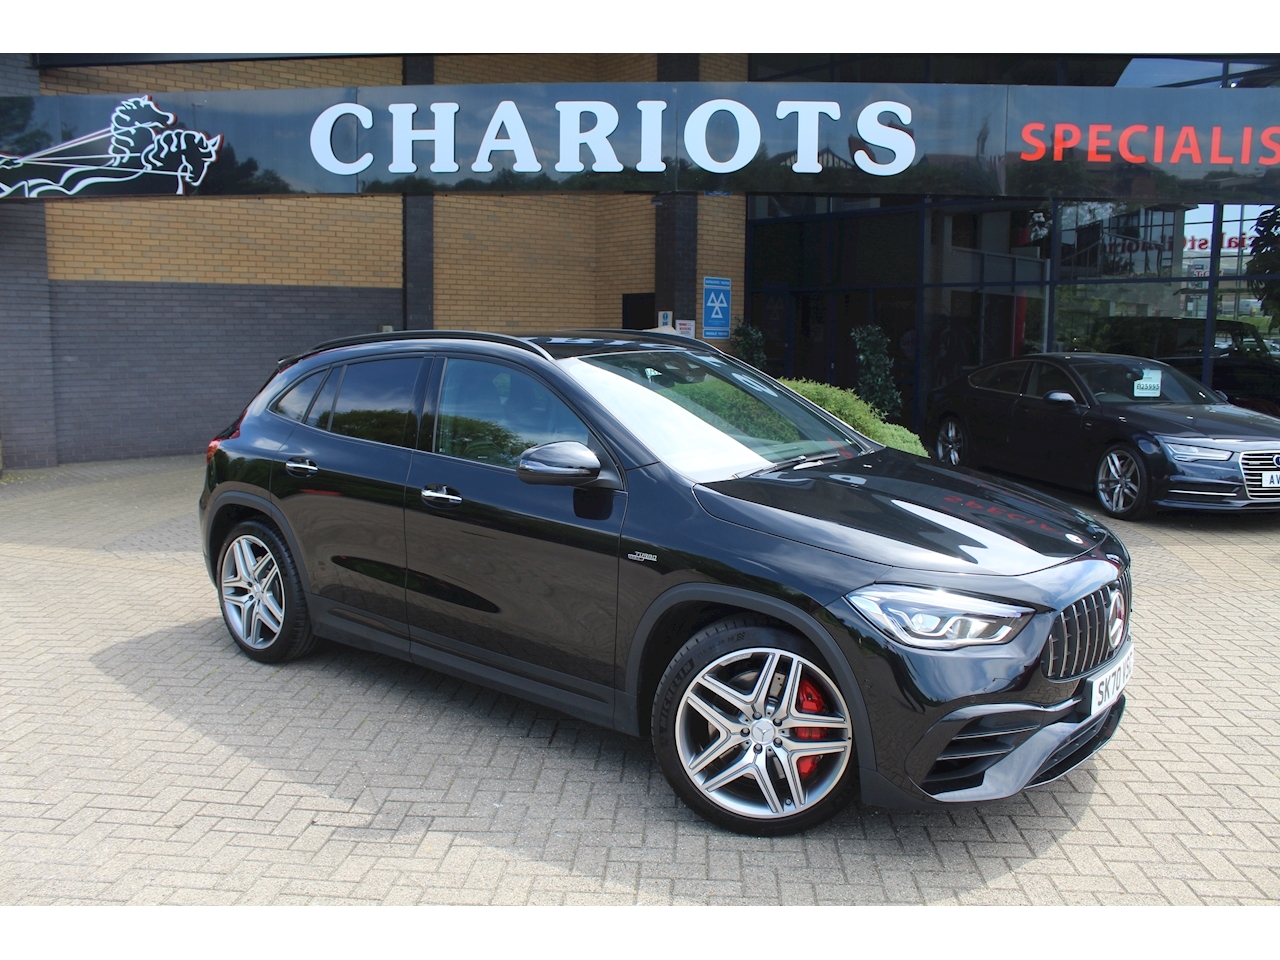 2.0 GLA45 AMG S SUV 5dr Petrol 8G-DCT 4MATIC+ (s/s) (421 ps)